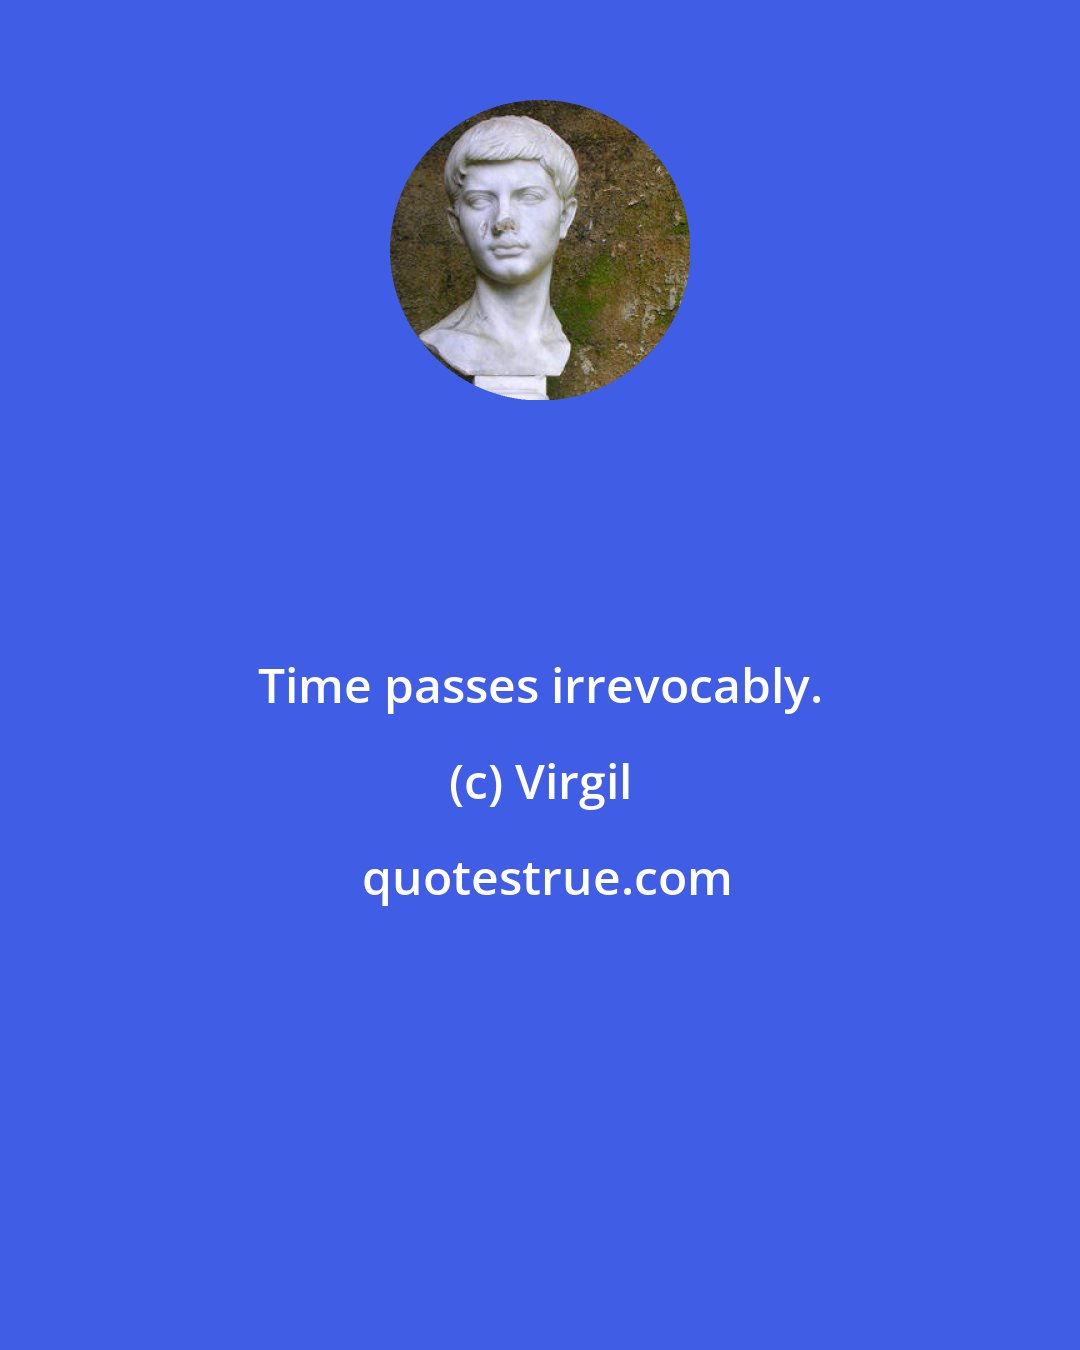 Virgil: Time passes irrevocably.